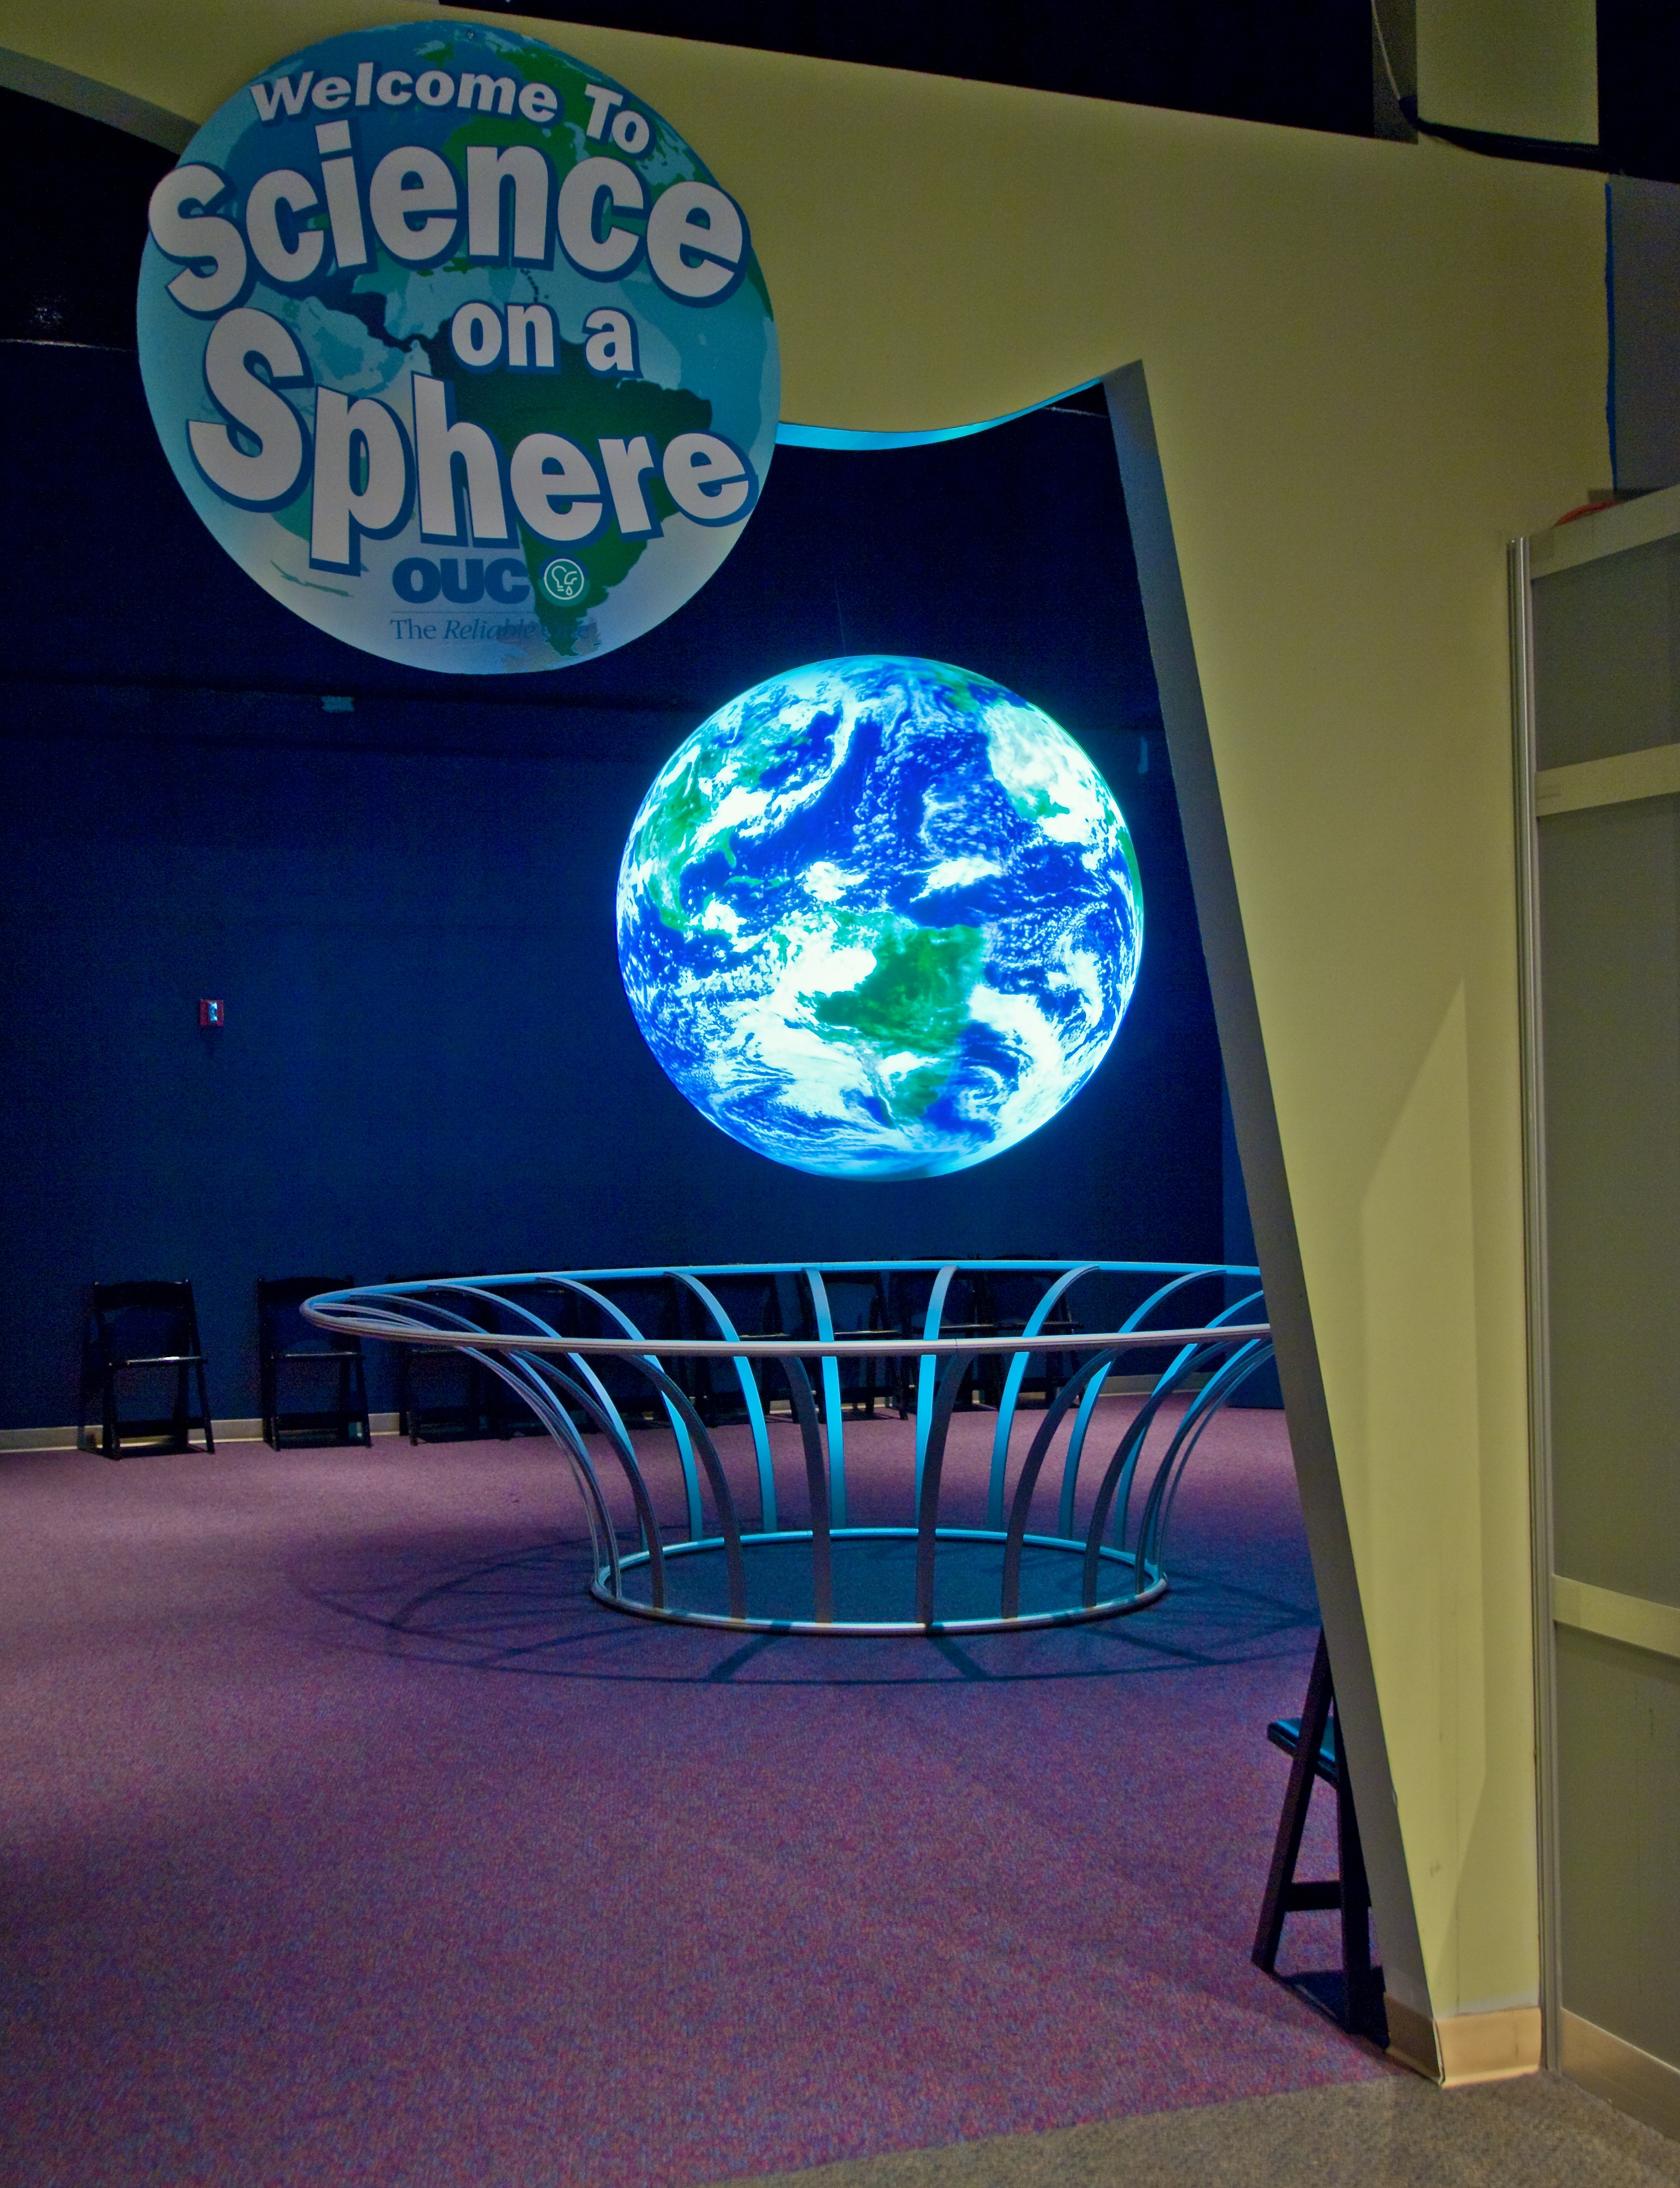 Science On a Sphere is visible through an entryway beneath a sign that reads 'Welcome to Science On a Sphere'. Several folding chairs line the wall behind the Sphere